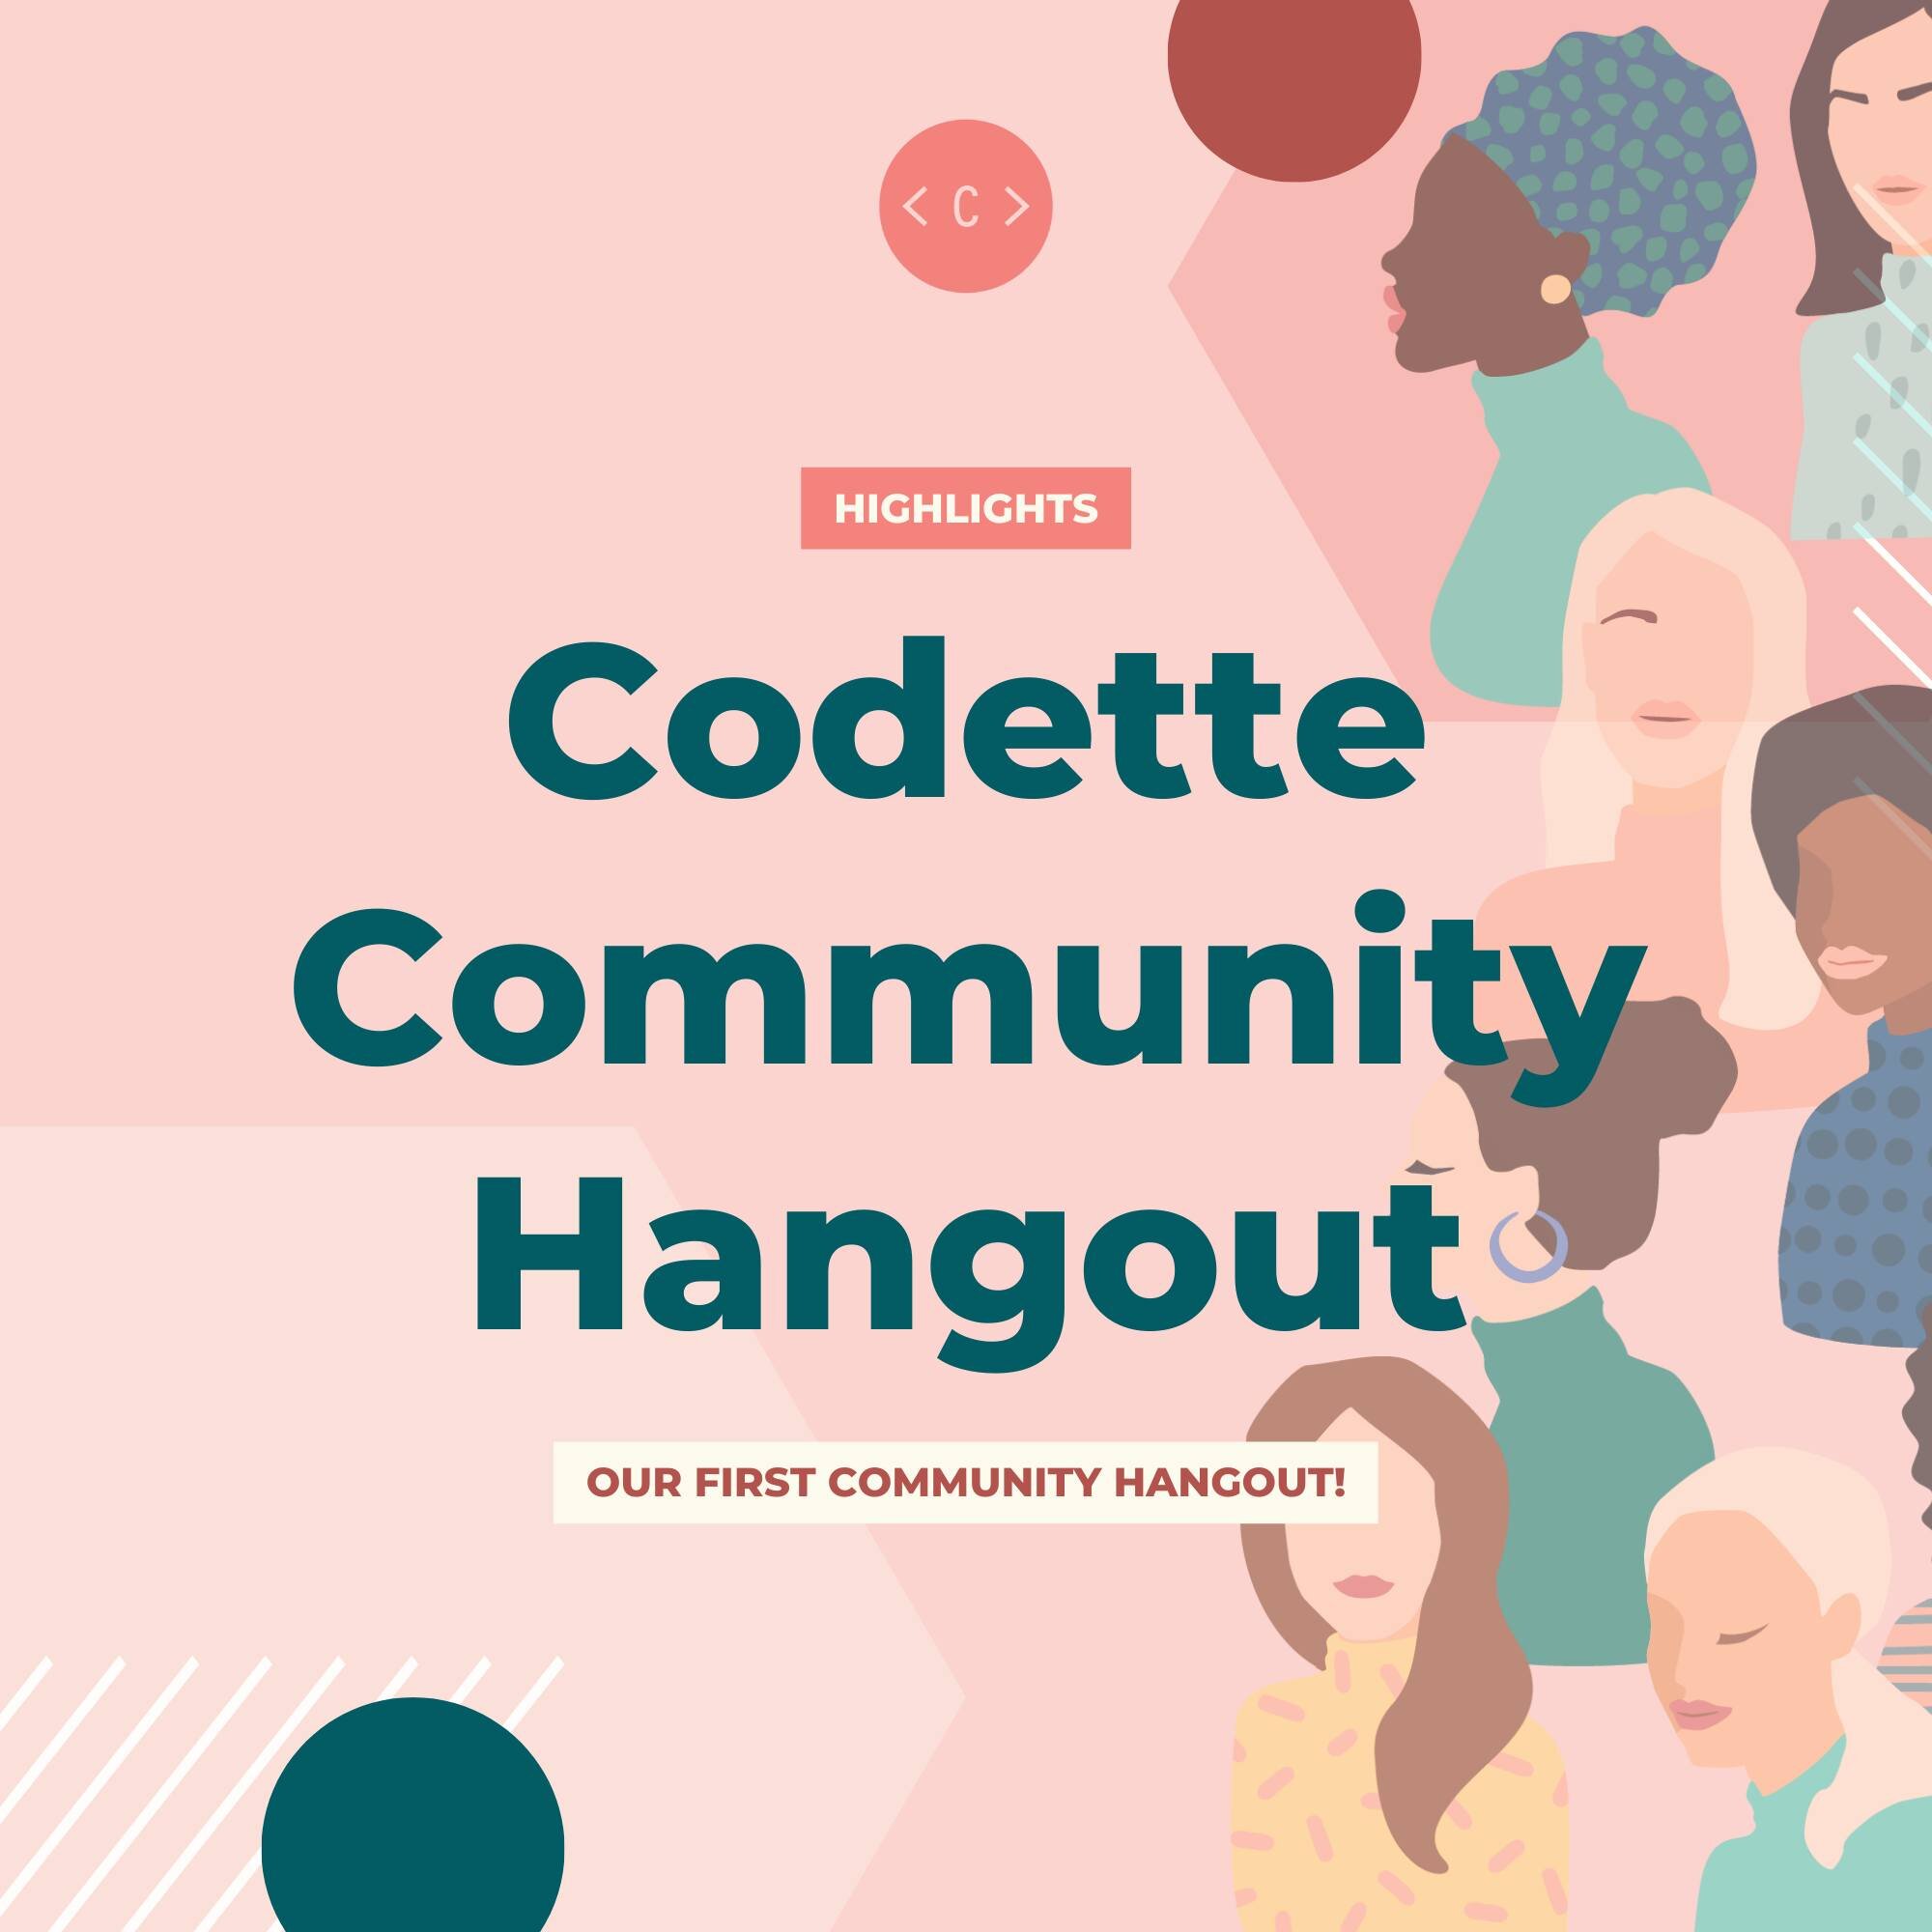 Last week we held our very first Codette Community Hangout! 🩷

Our community is made up of people from all walks of life. We had a chill hangout session where we got to learn from each other and find out more about our different backgrounds 💻

Than